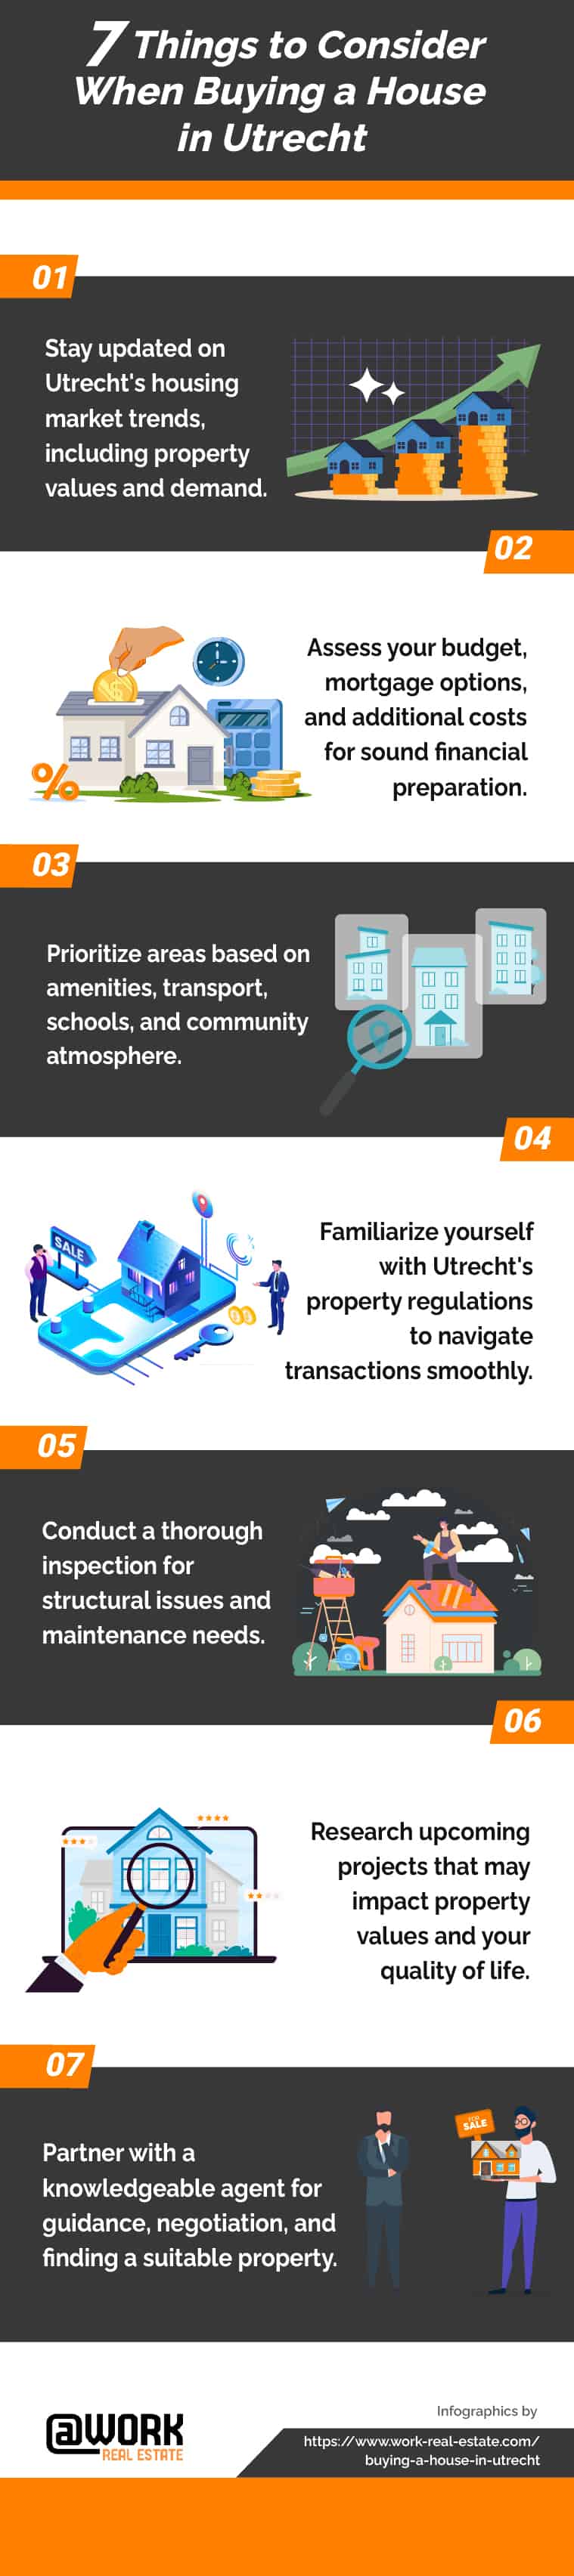 Things to Consider When Buying a House in Utrecht 